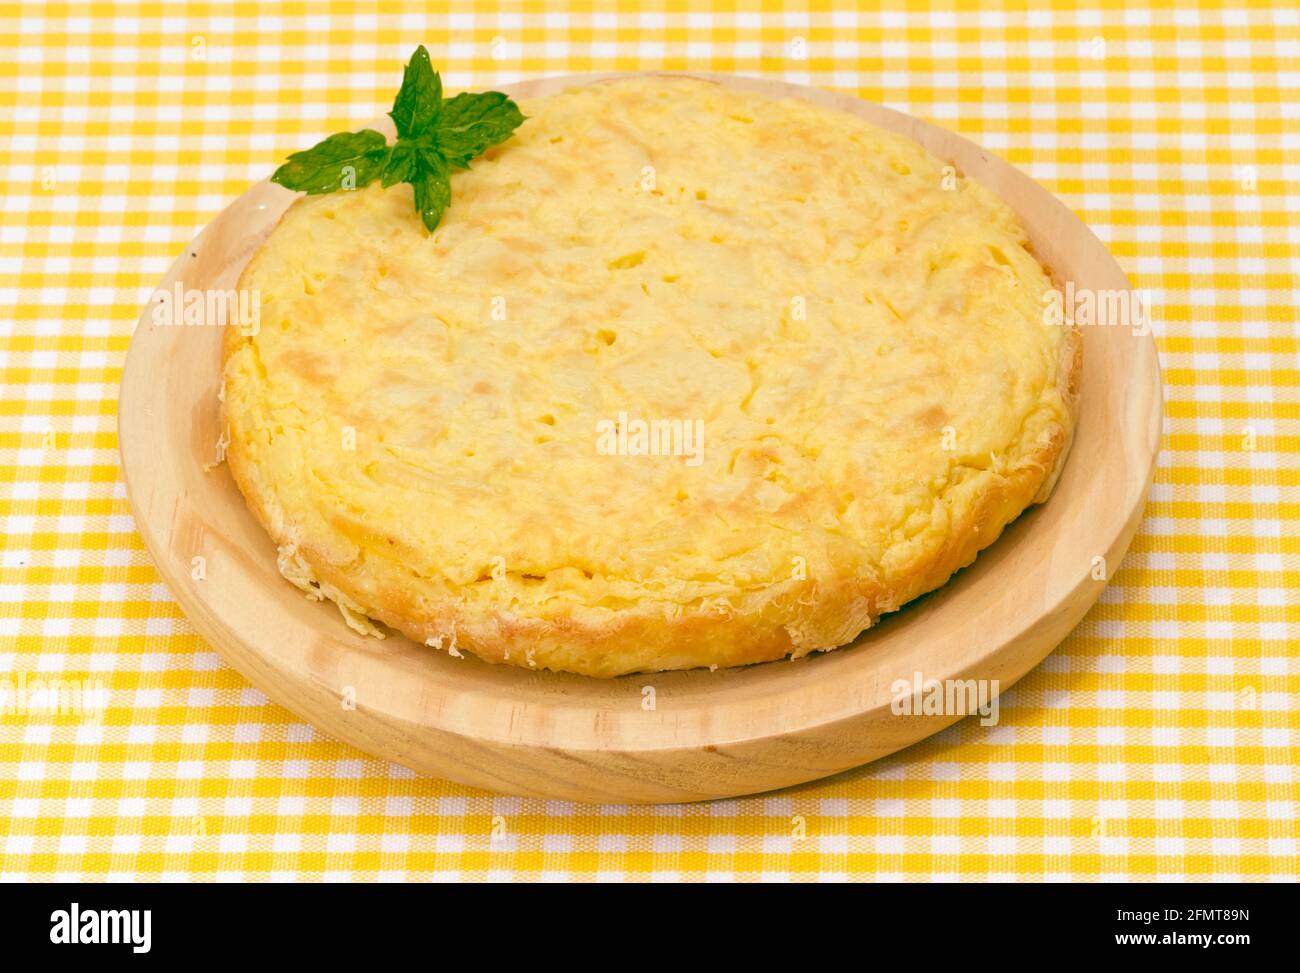 Spanish omelette with potatoes, parsley leaf gift auction Stock Photo